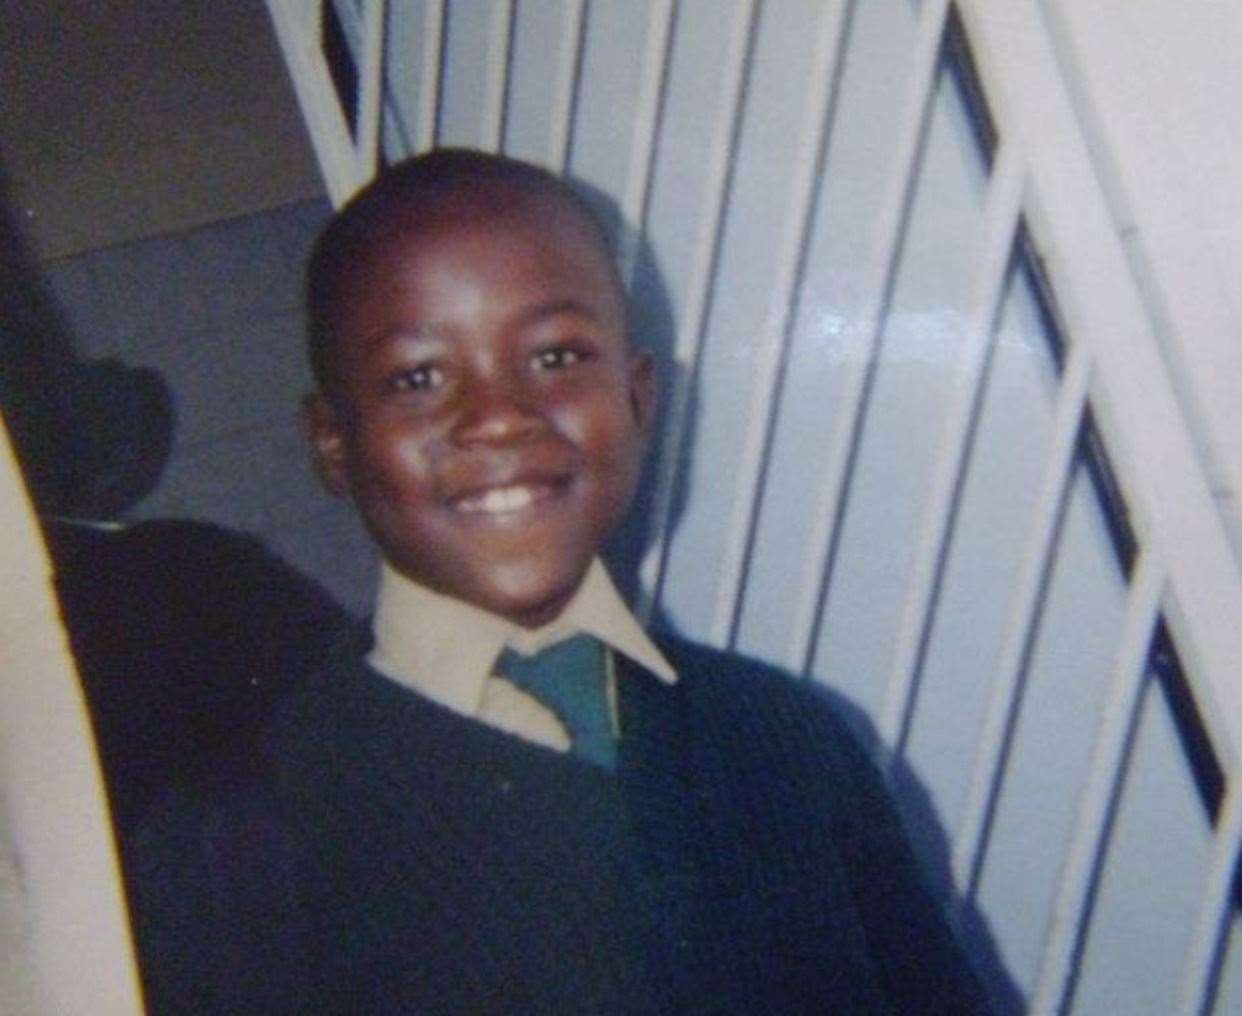 Emmanuel was born in Zimbabwe before moving to Folkestone almost 20 years ago. Picture: Millie Kamba-Gotora